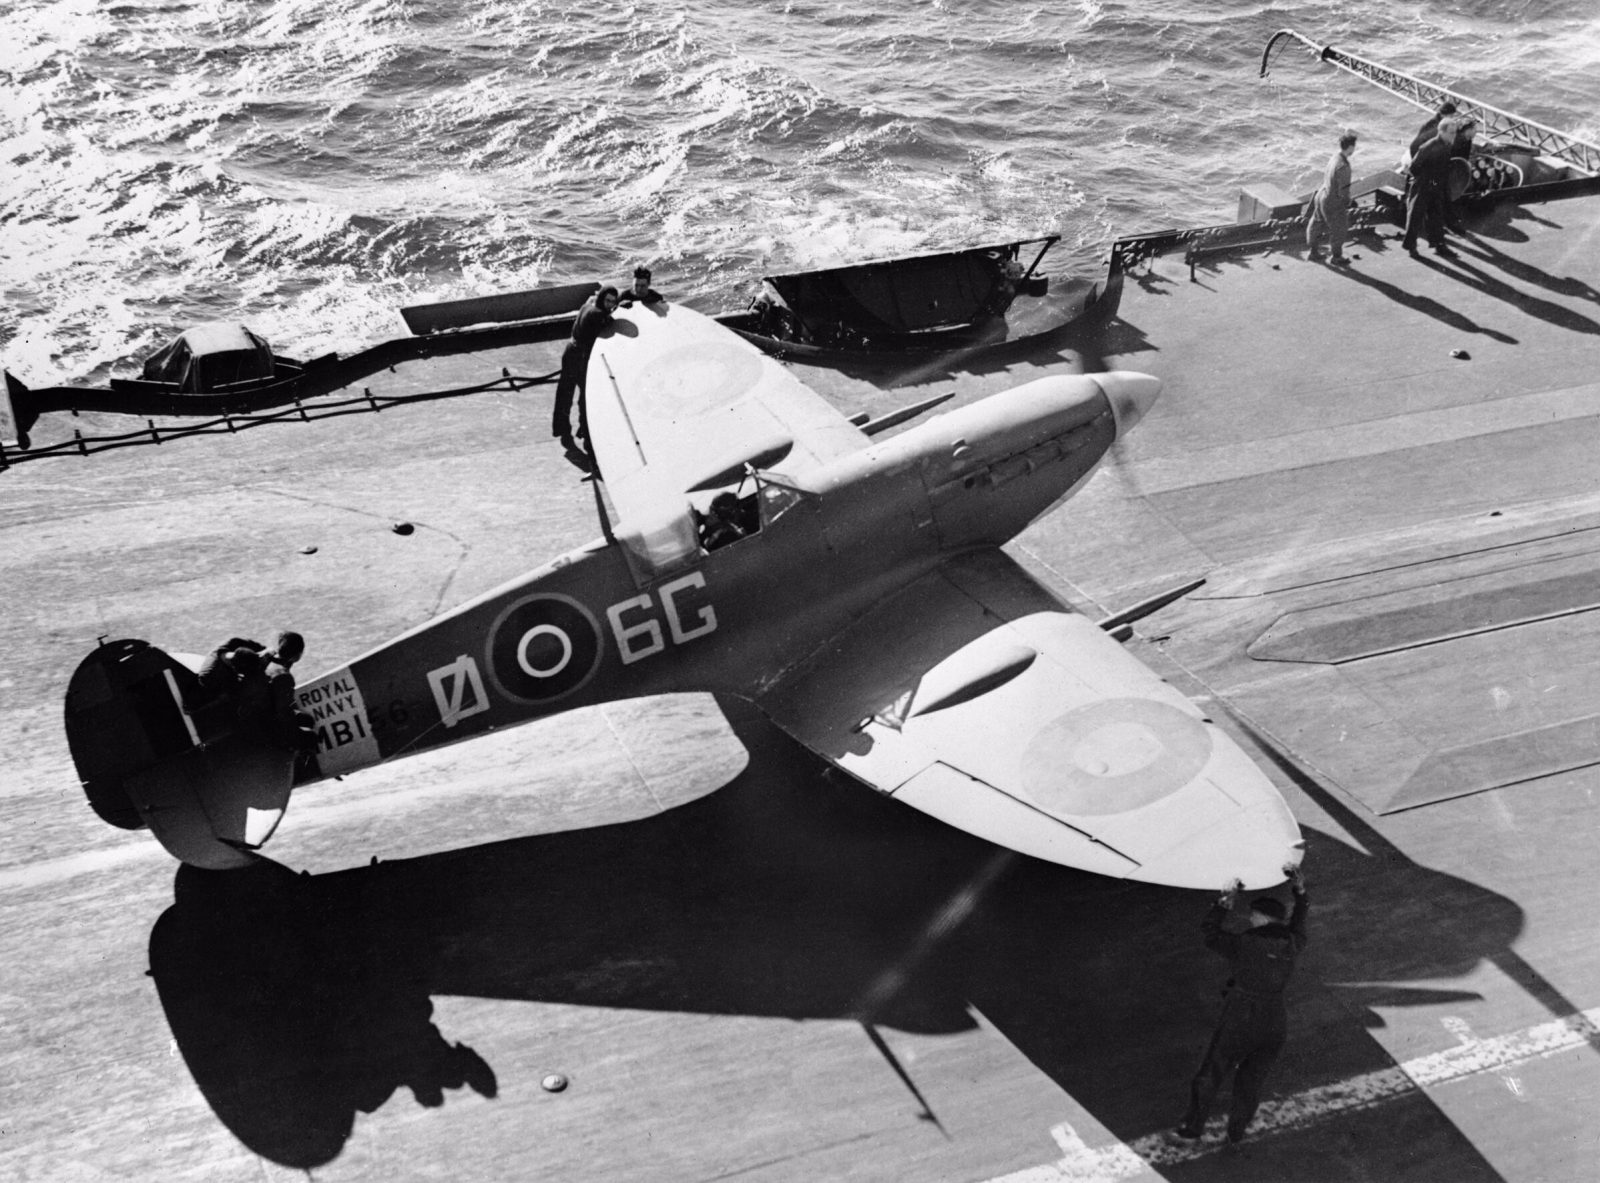 Supermarine Seafire; British Royal Navy's Carrier-based Fighter Aircraft